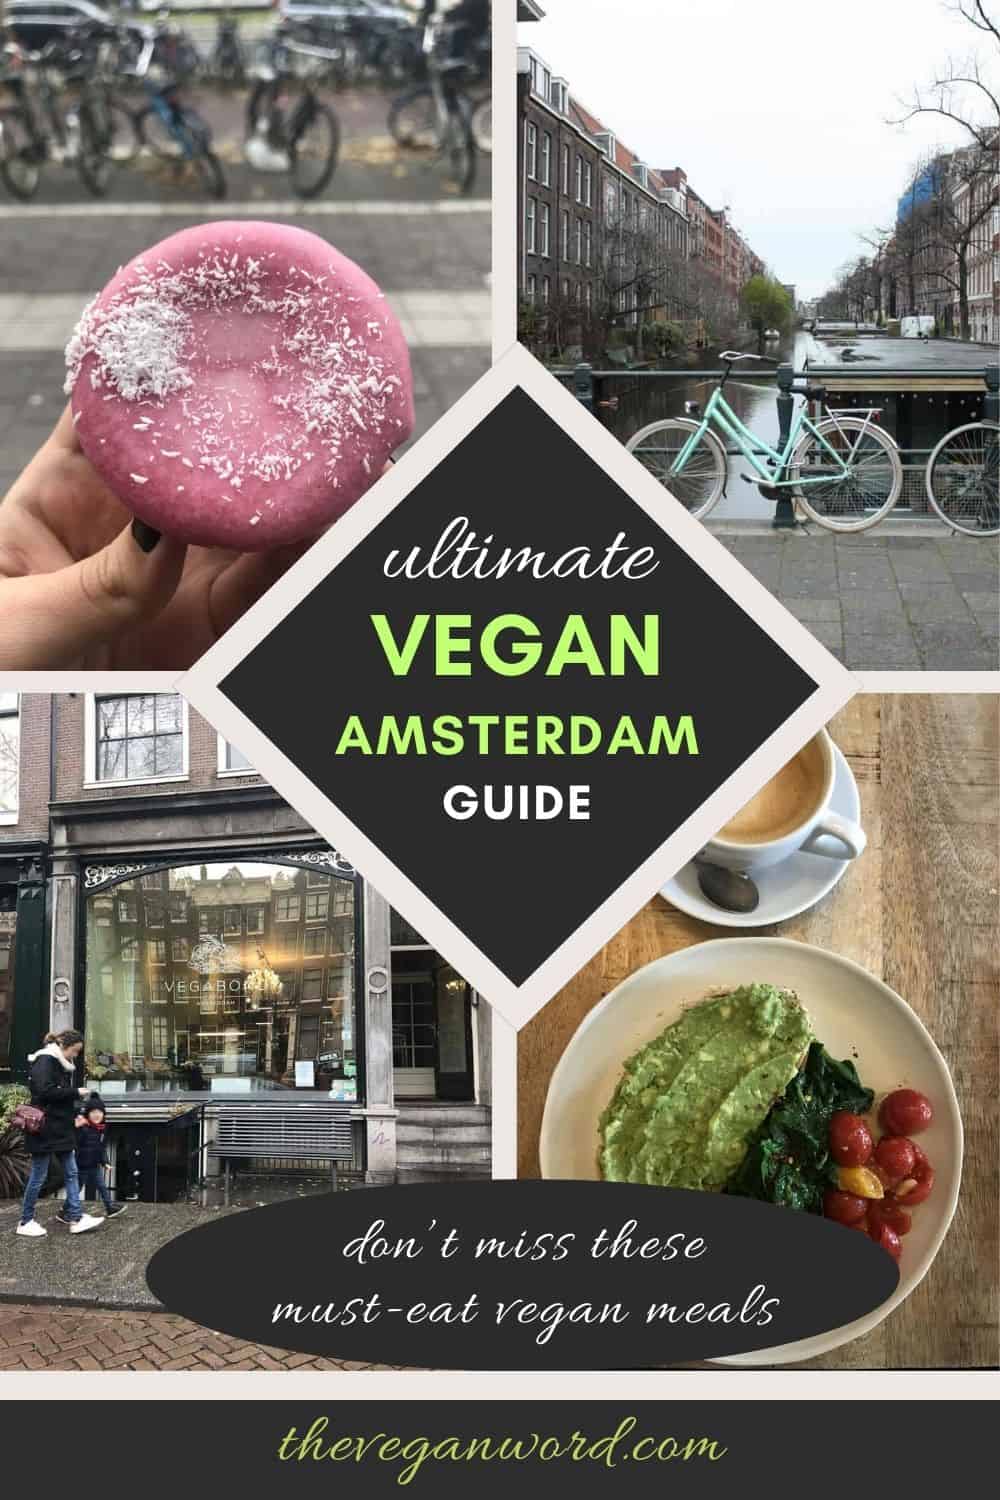 Pinterest image showing Amsterdam canal, vegan shopfront, plate of vegan breakfast (avocado toast and veggies) and vegan roze koek, with text that reads "ultimate vegan amsterdam guide: don't miss these must-eat vegan meals"